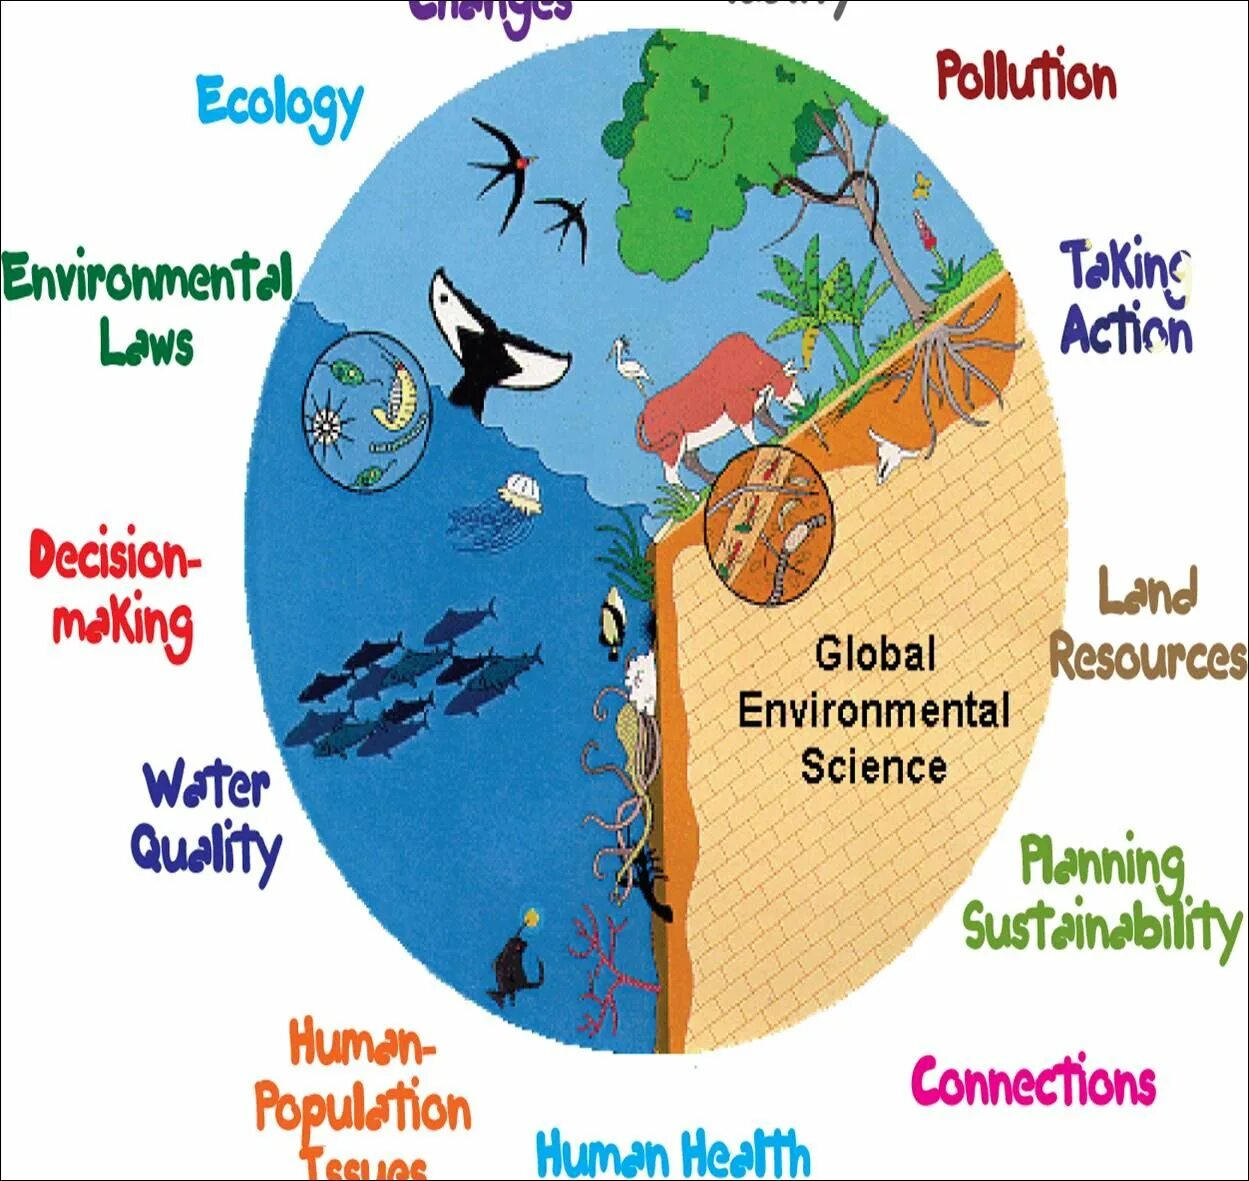 Topic environmental. Environment and Environmental problems. Таблица ecological problems. Global ecological problems. Плакат на тему ecological problems.